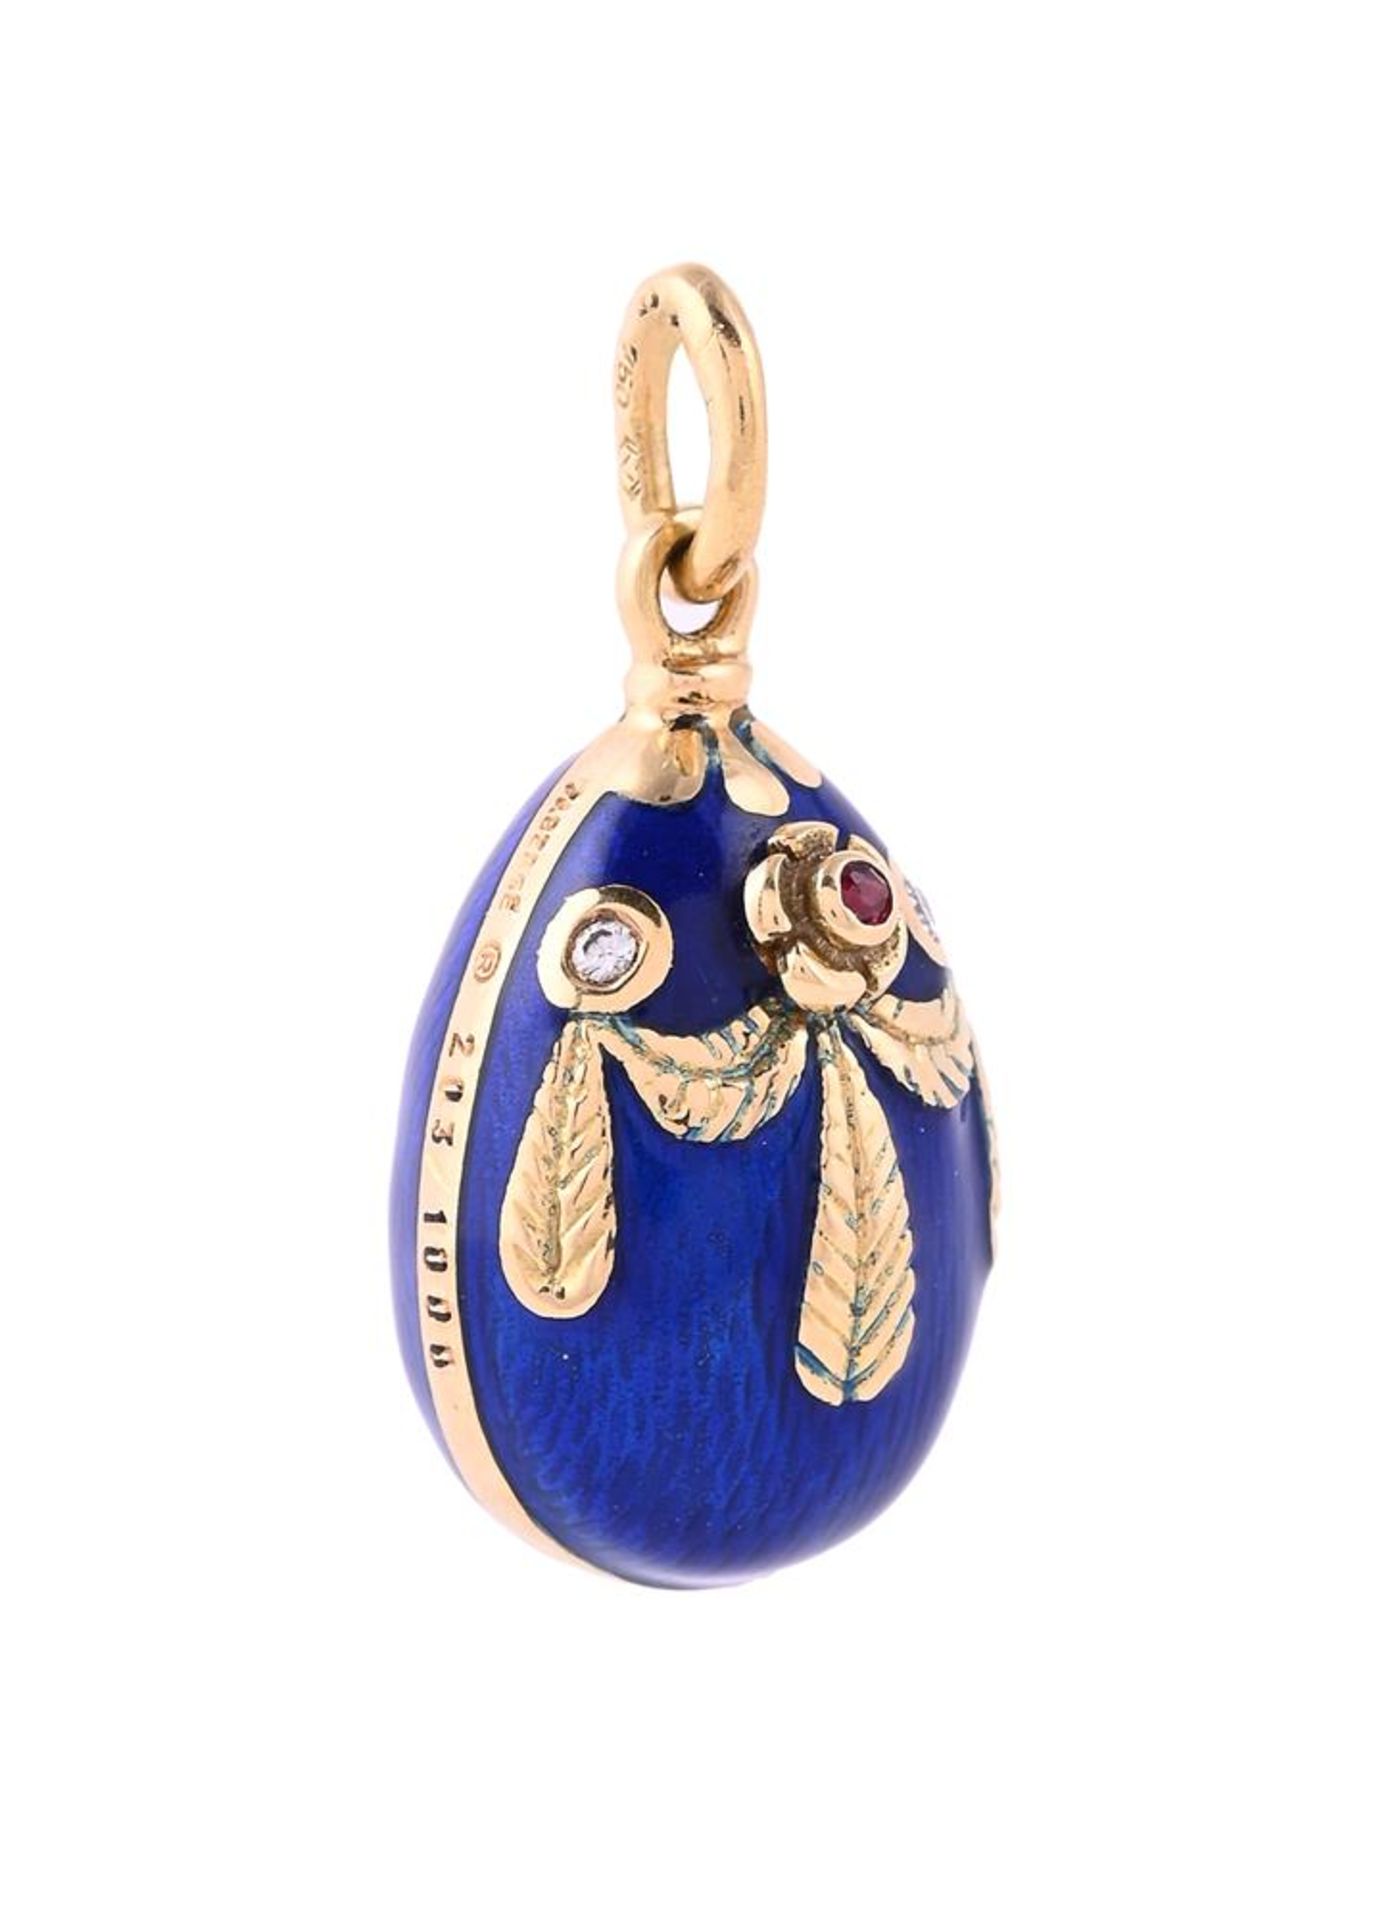 VICTOR MAYER FOR FABERGE, AN 18 CARAT GOLD, RUBY AND DIAMOND EGG PENDANT, LONDON 1994 IMPORT MARK - Image 2 of 4